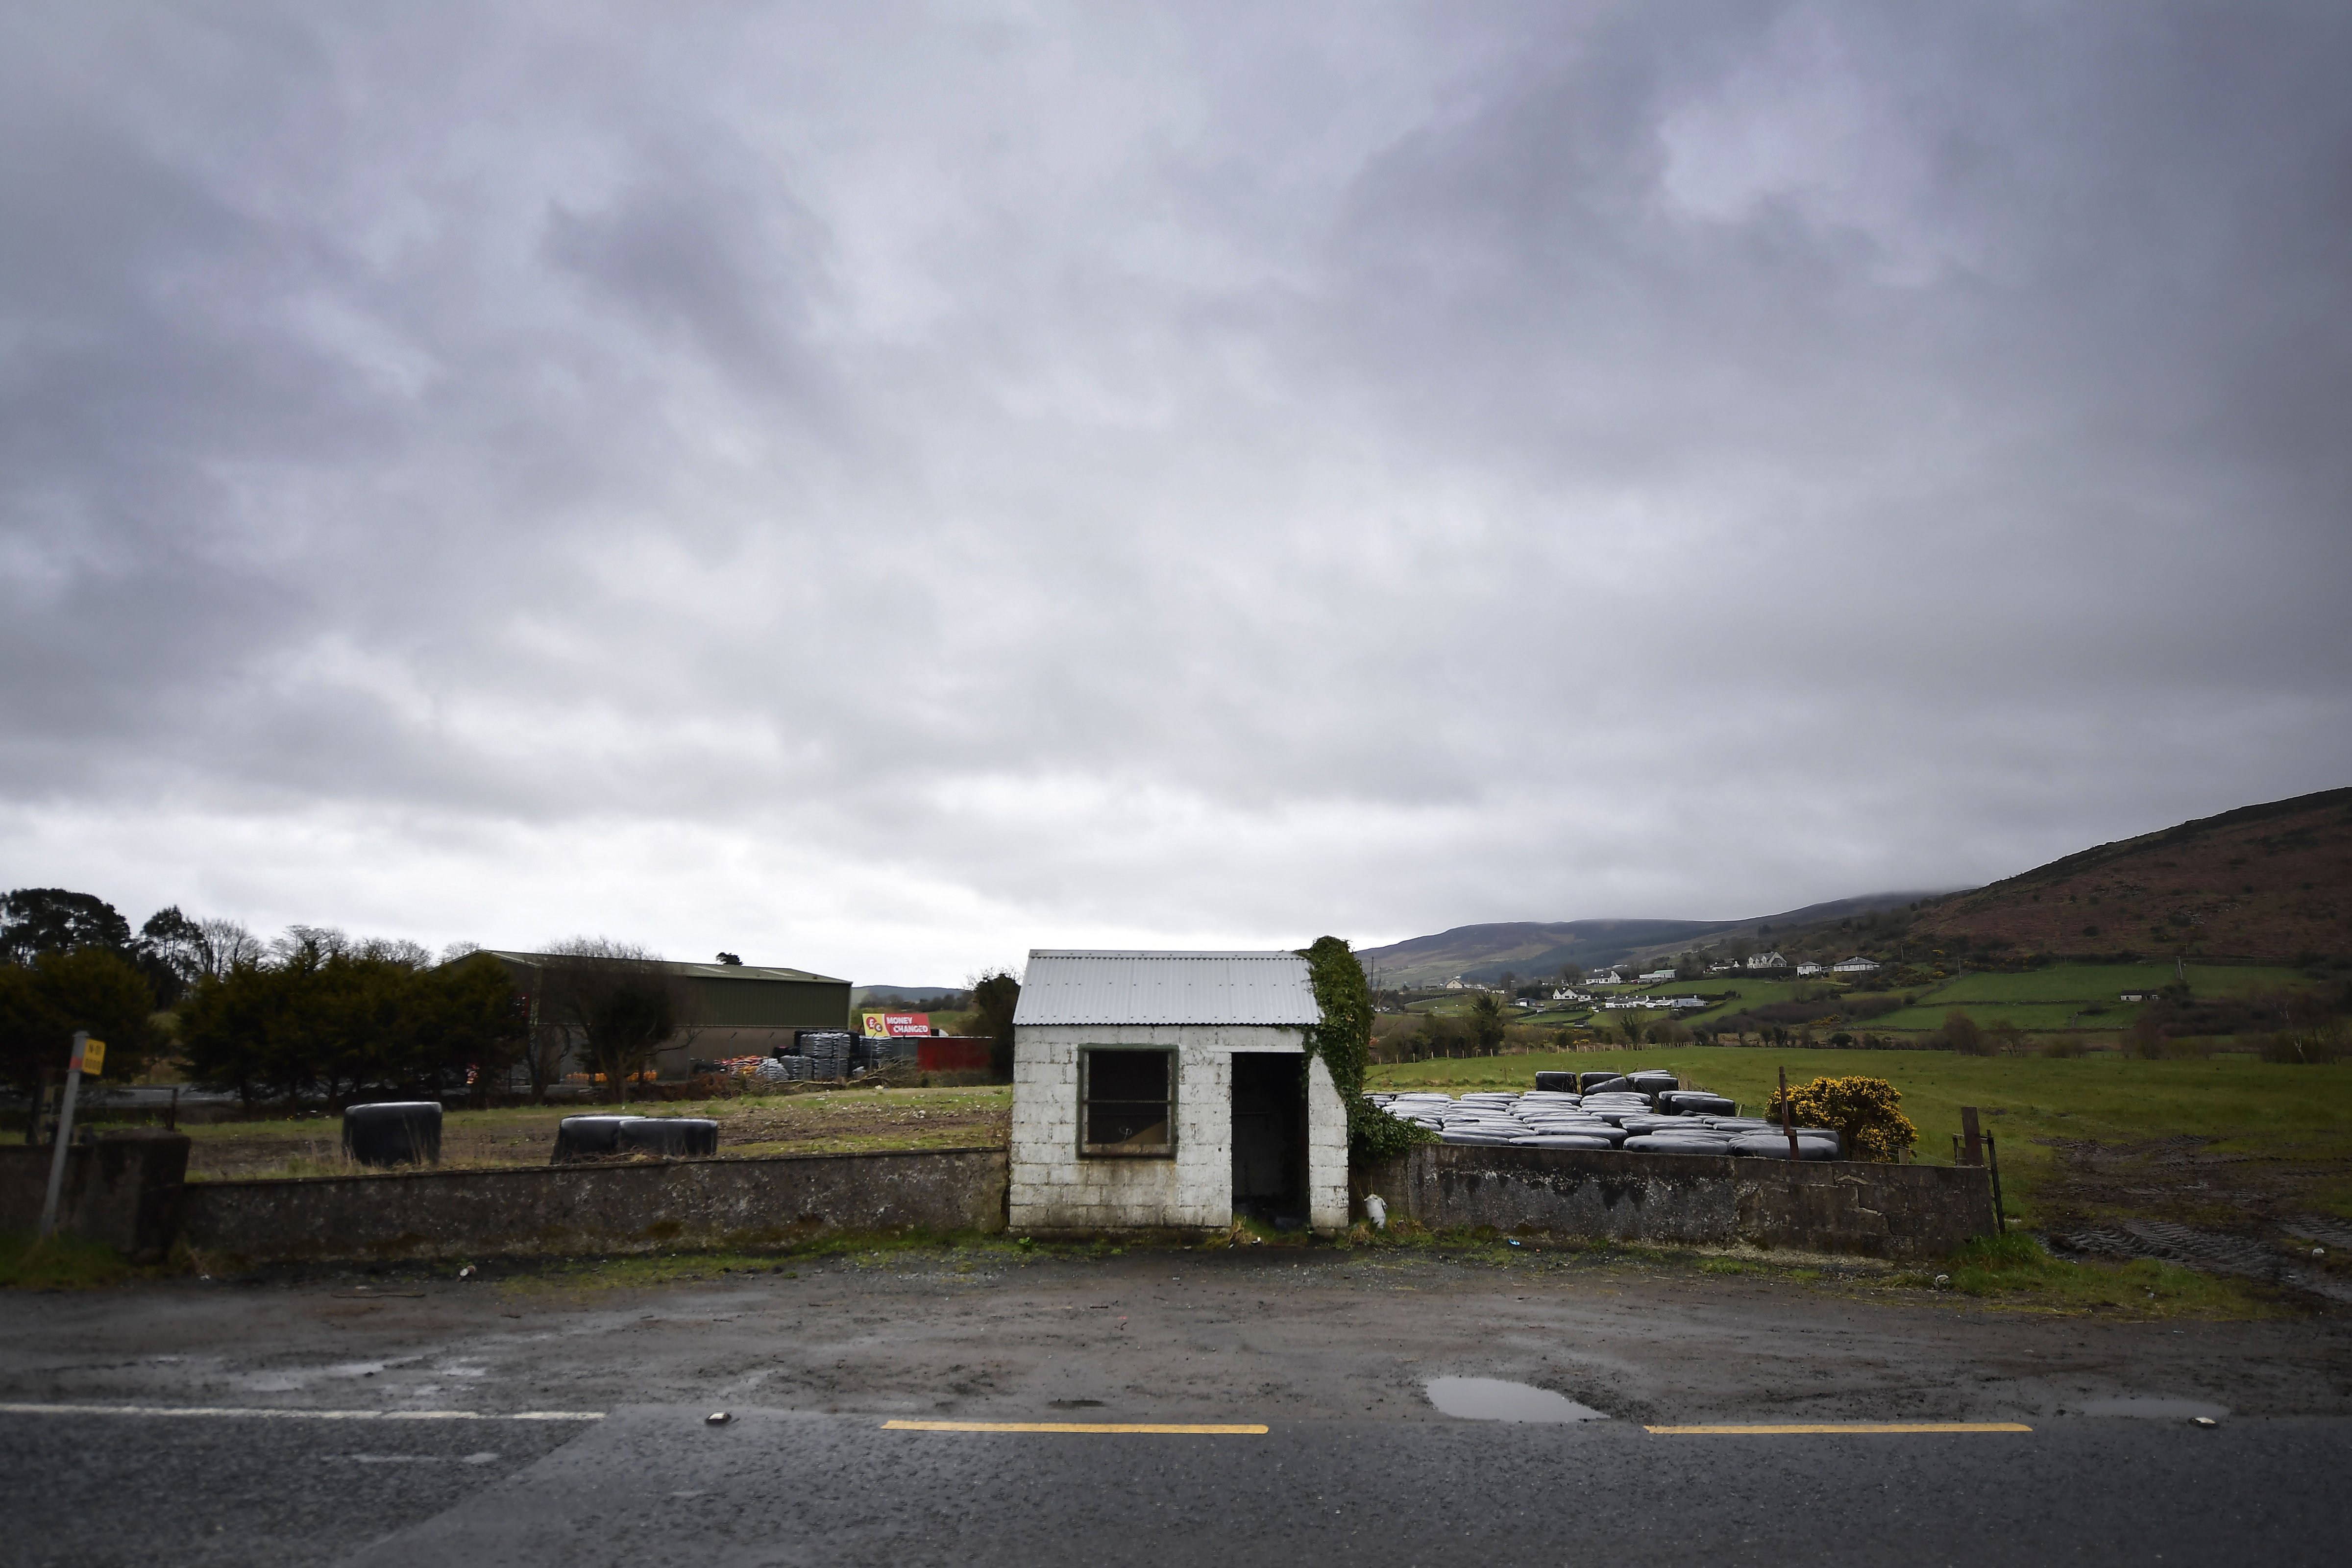 A former customs guard hut directly situated on the north-south Irish border stands disused as Brexit is triggered on March 29, 2017 in Newry, Northern Ireland. The northern Irish border is the United Kingdom's only land border with the rest of Europe. (Charles McQuillan—Getty Images)